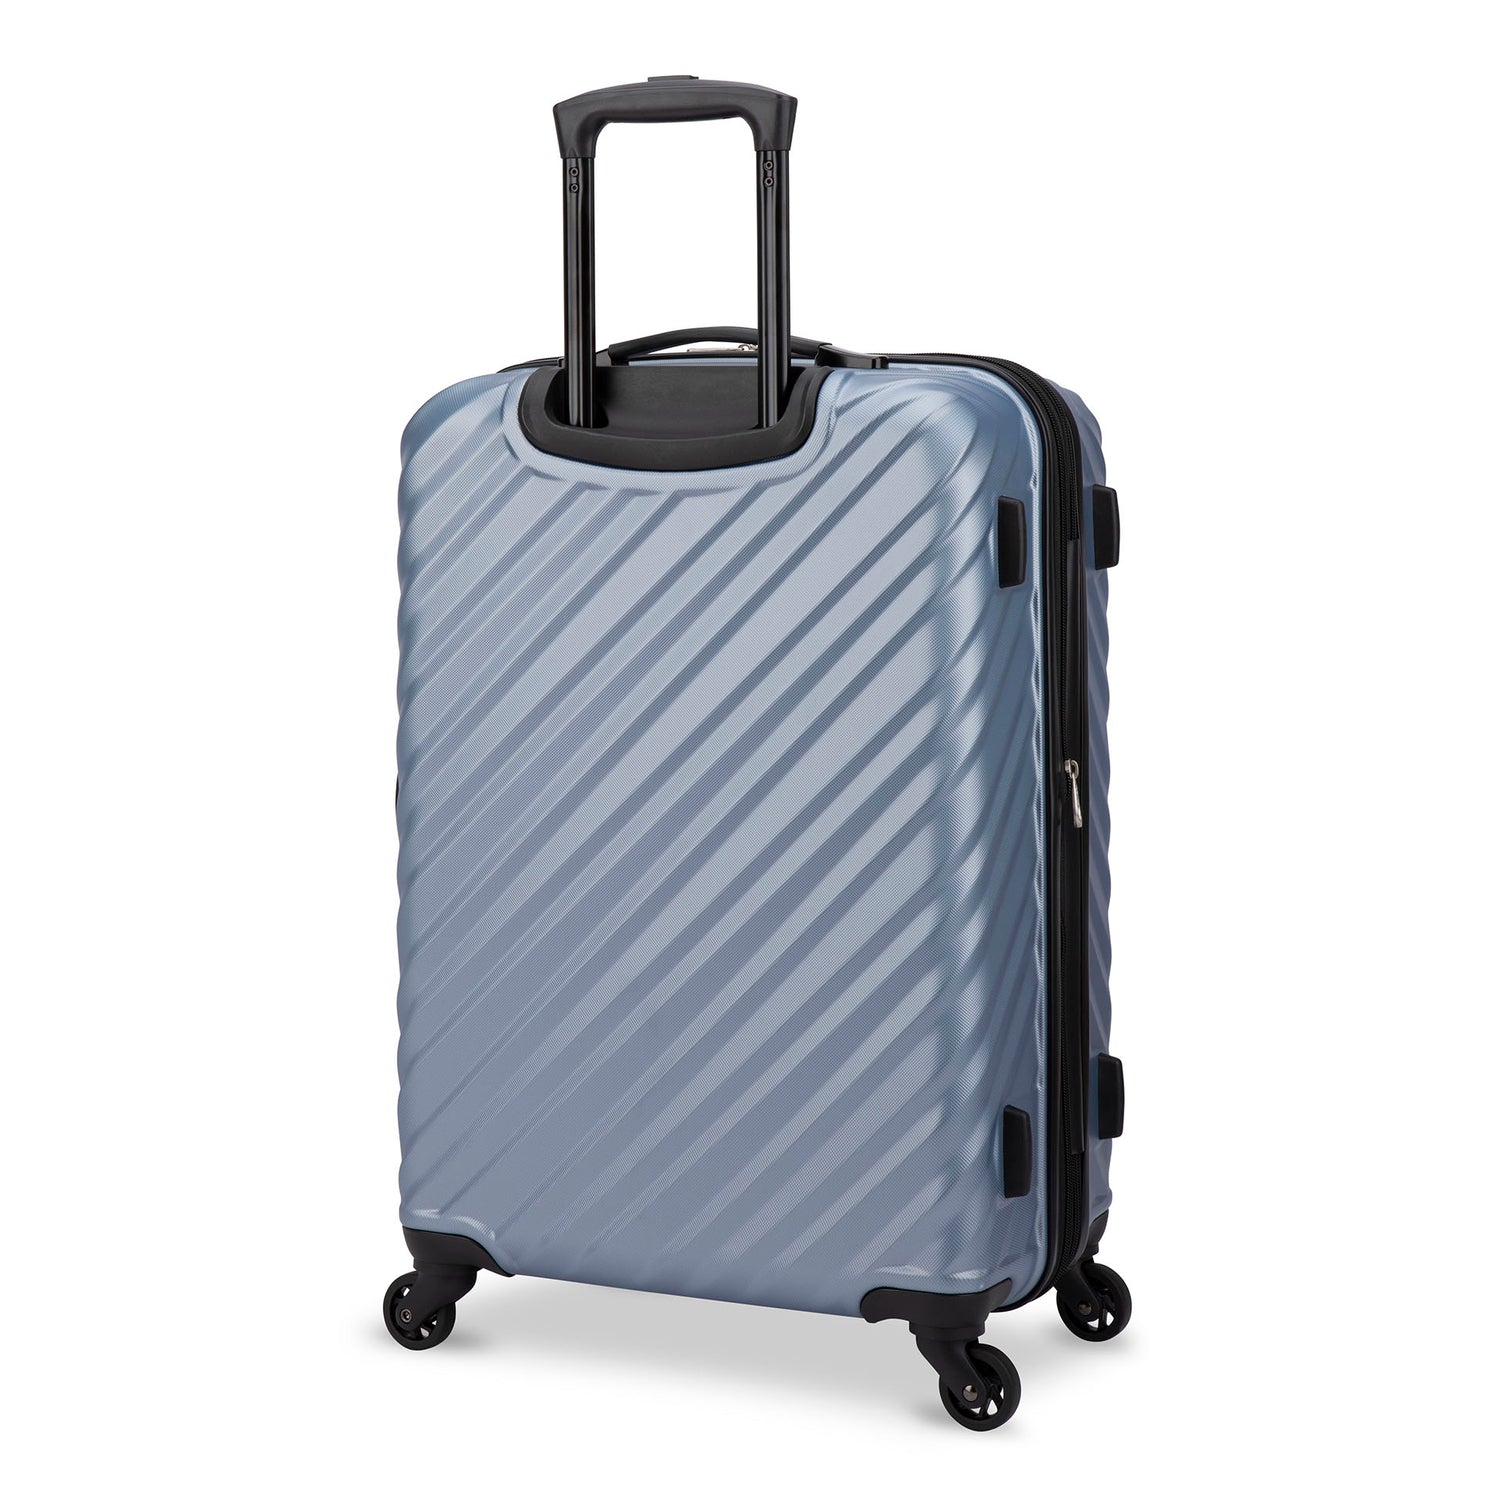 Back side view of a silverish blue hard side luggage called MOD designed by Swiss Gear sold at Bentley, showcasing its telescopic handle and resistant-absorbant texture.